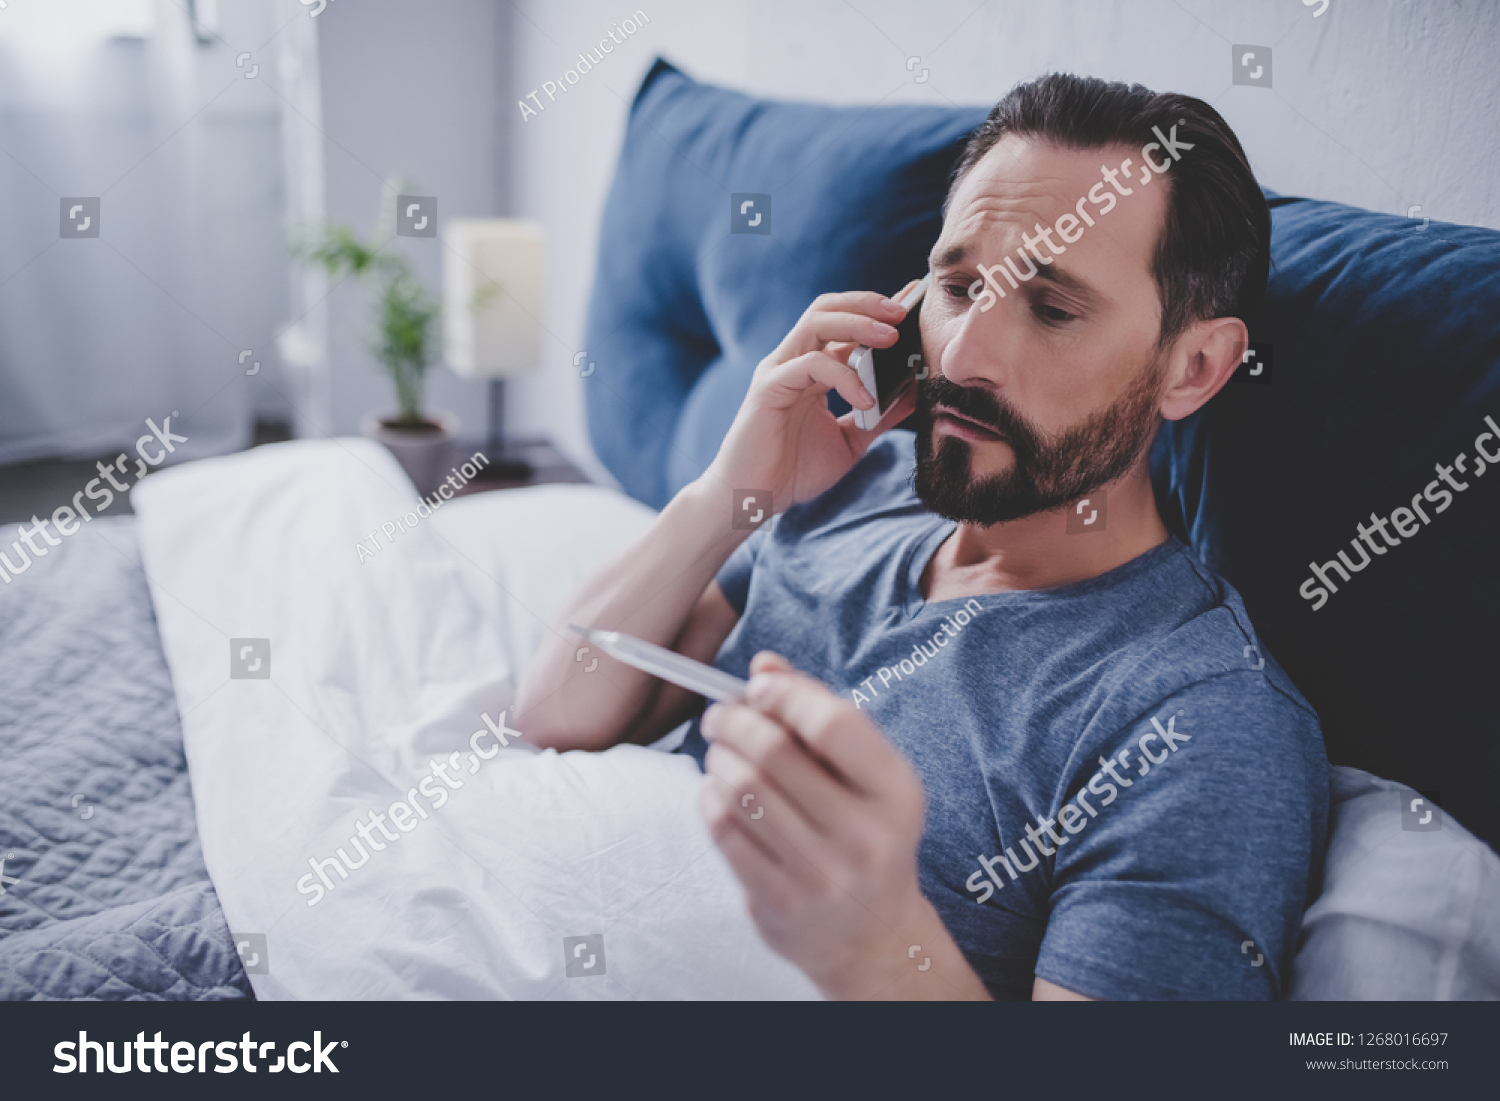 portrait of sick man holding thermometer and calling a doctor while sitting on the bed #1268016697